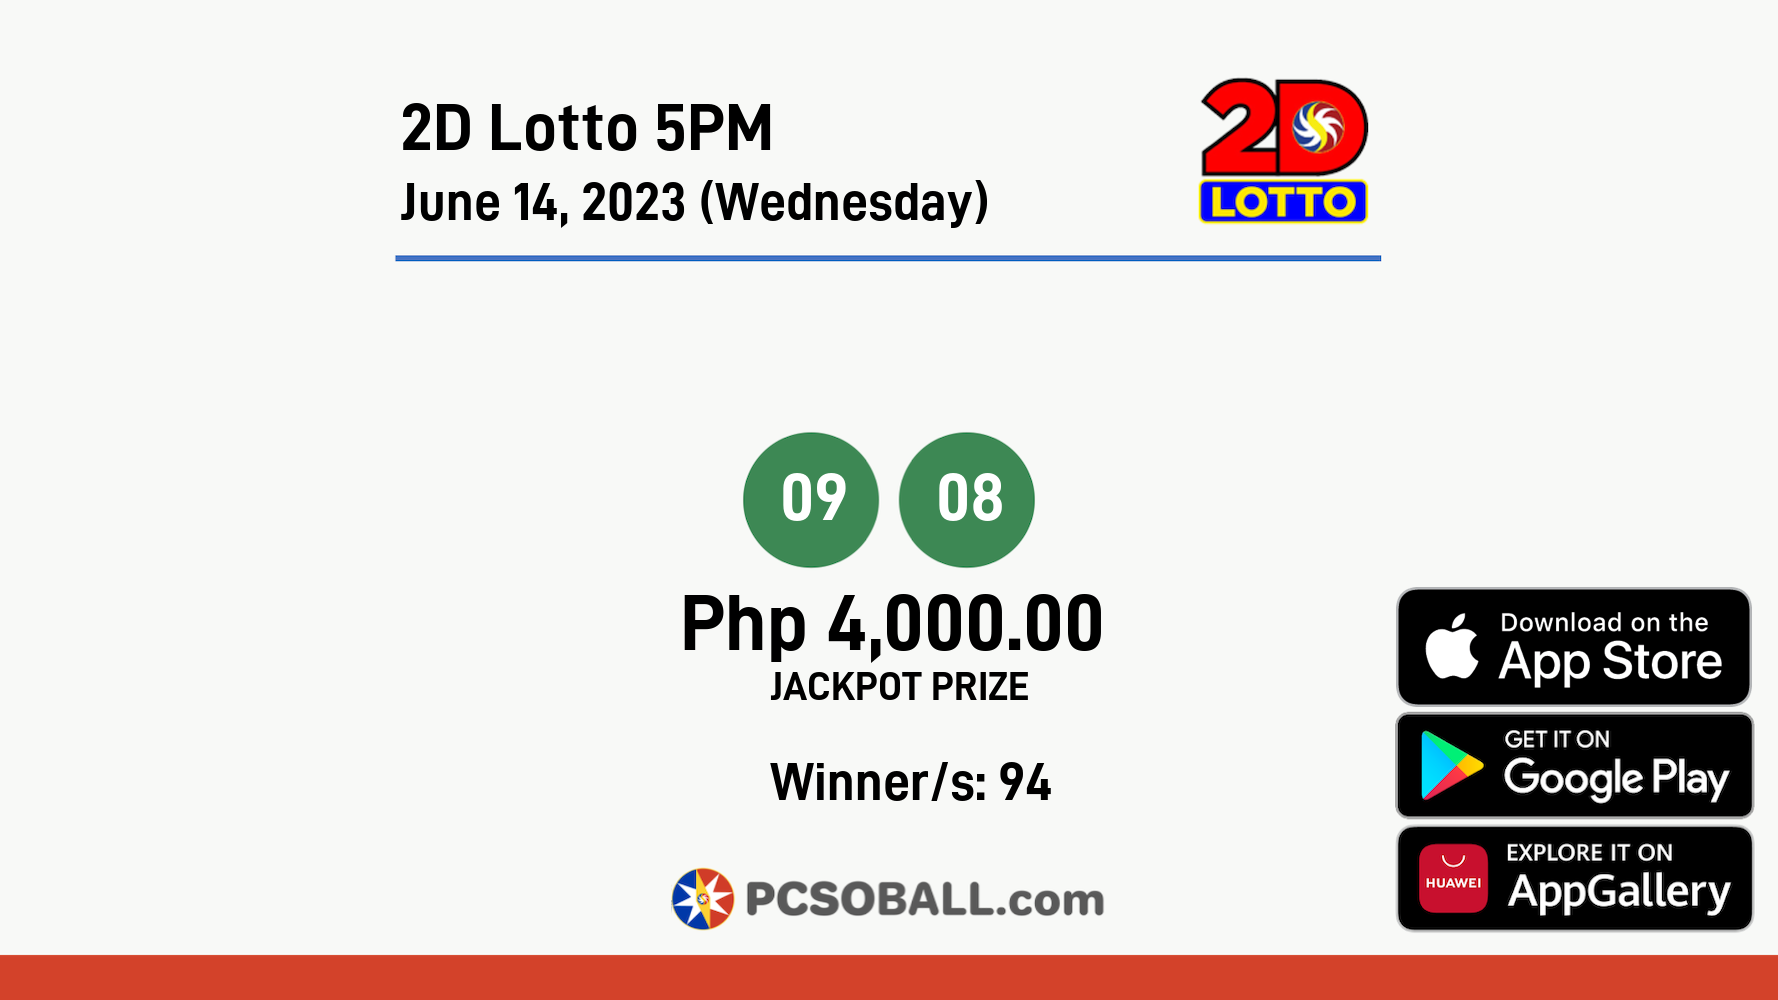 2D Lotto 5PM June 14, 2023 (Wednesday) Result